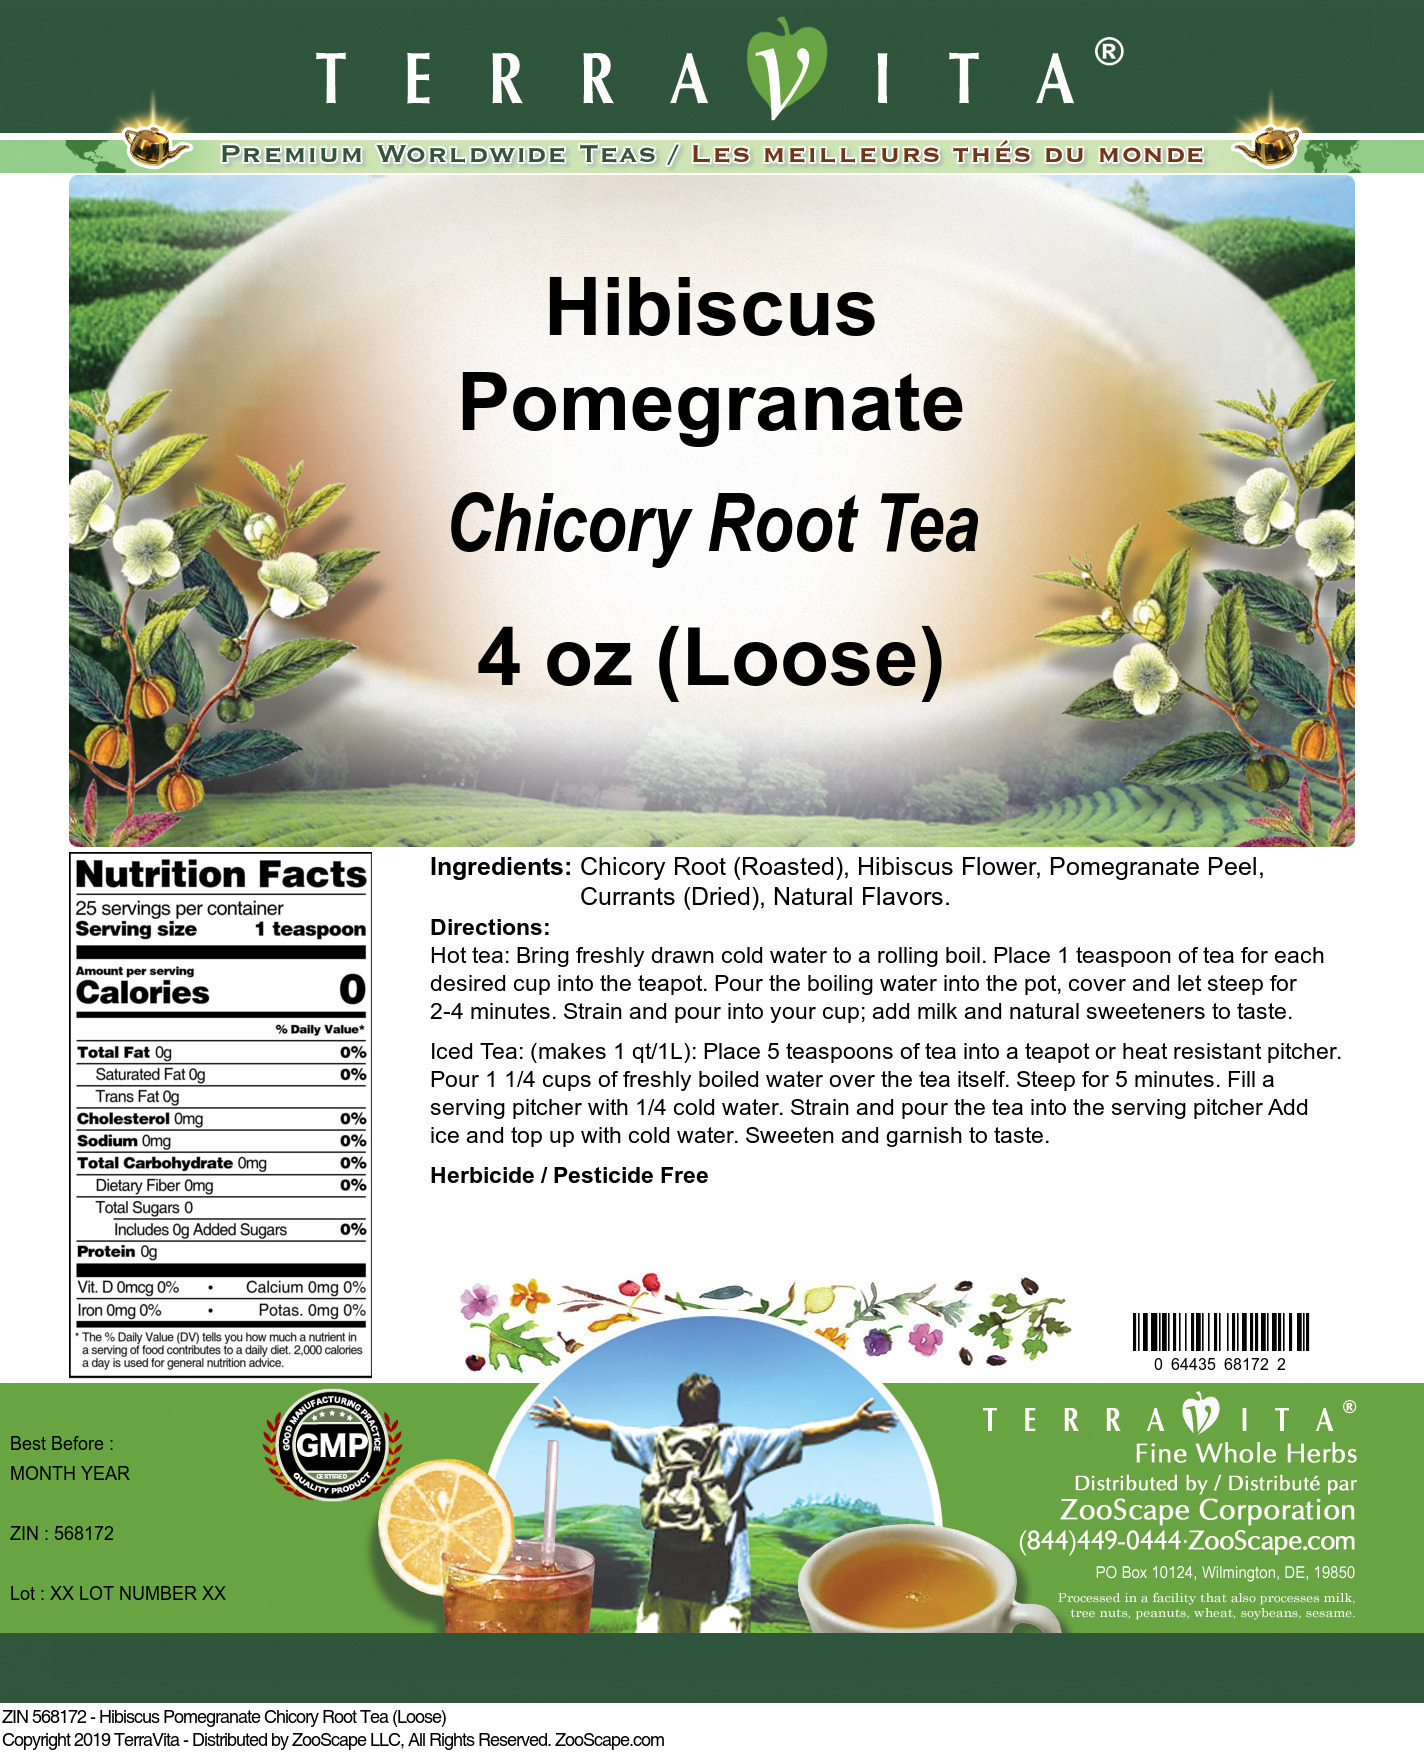 Hibiscus Pomegranate Chicory Root Tea (Loose) - Label